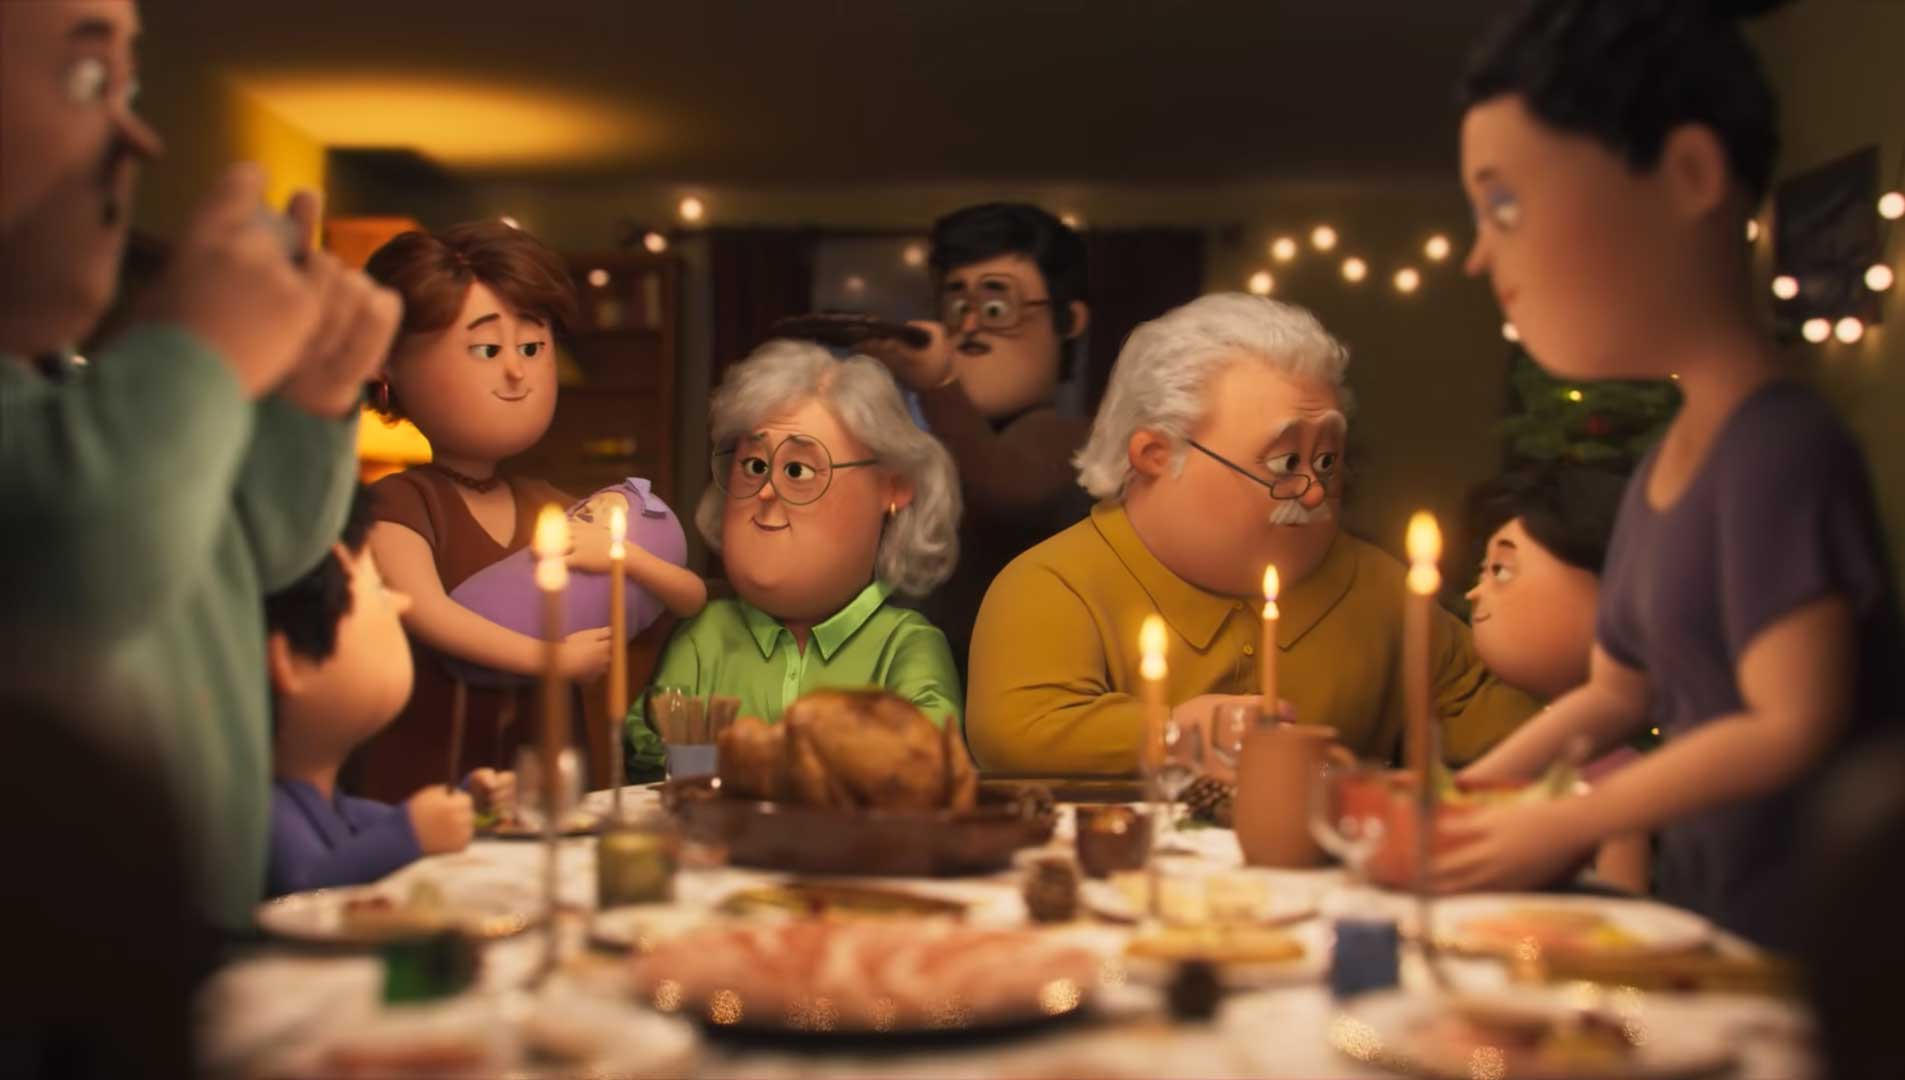 MegaComputeur and Passion Pictures Suchard Holiday Spot | STASH MAGAZINE